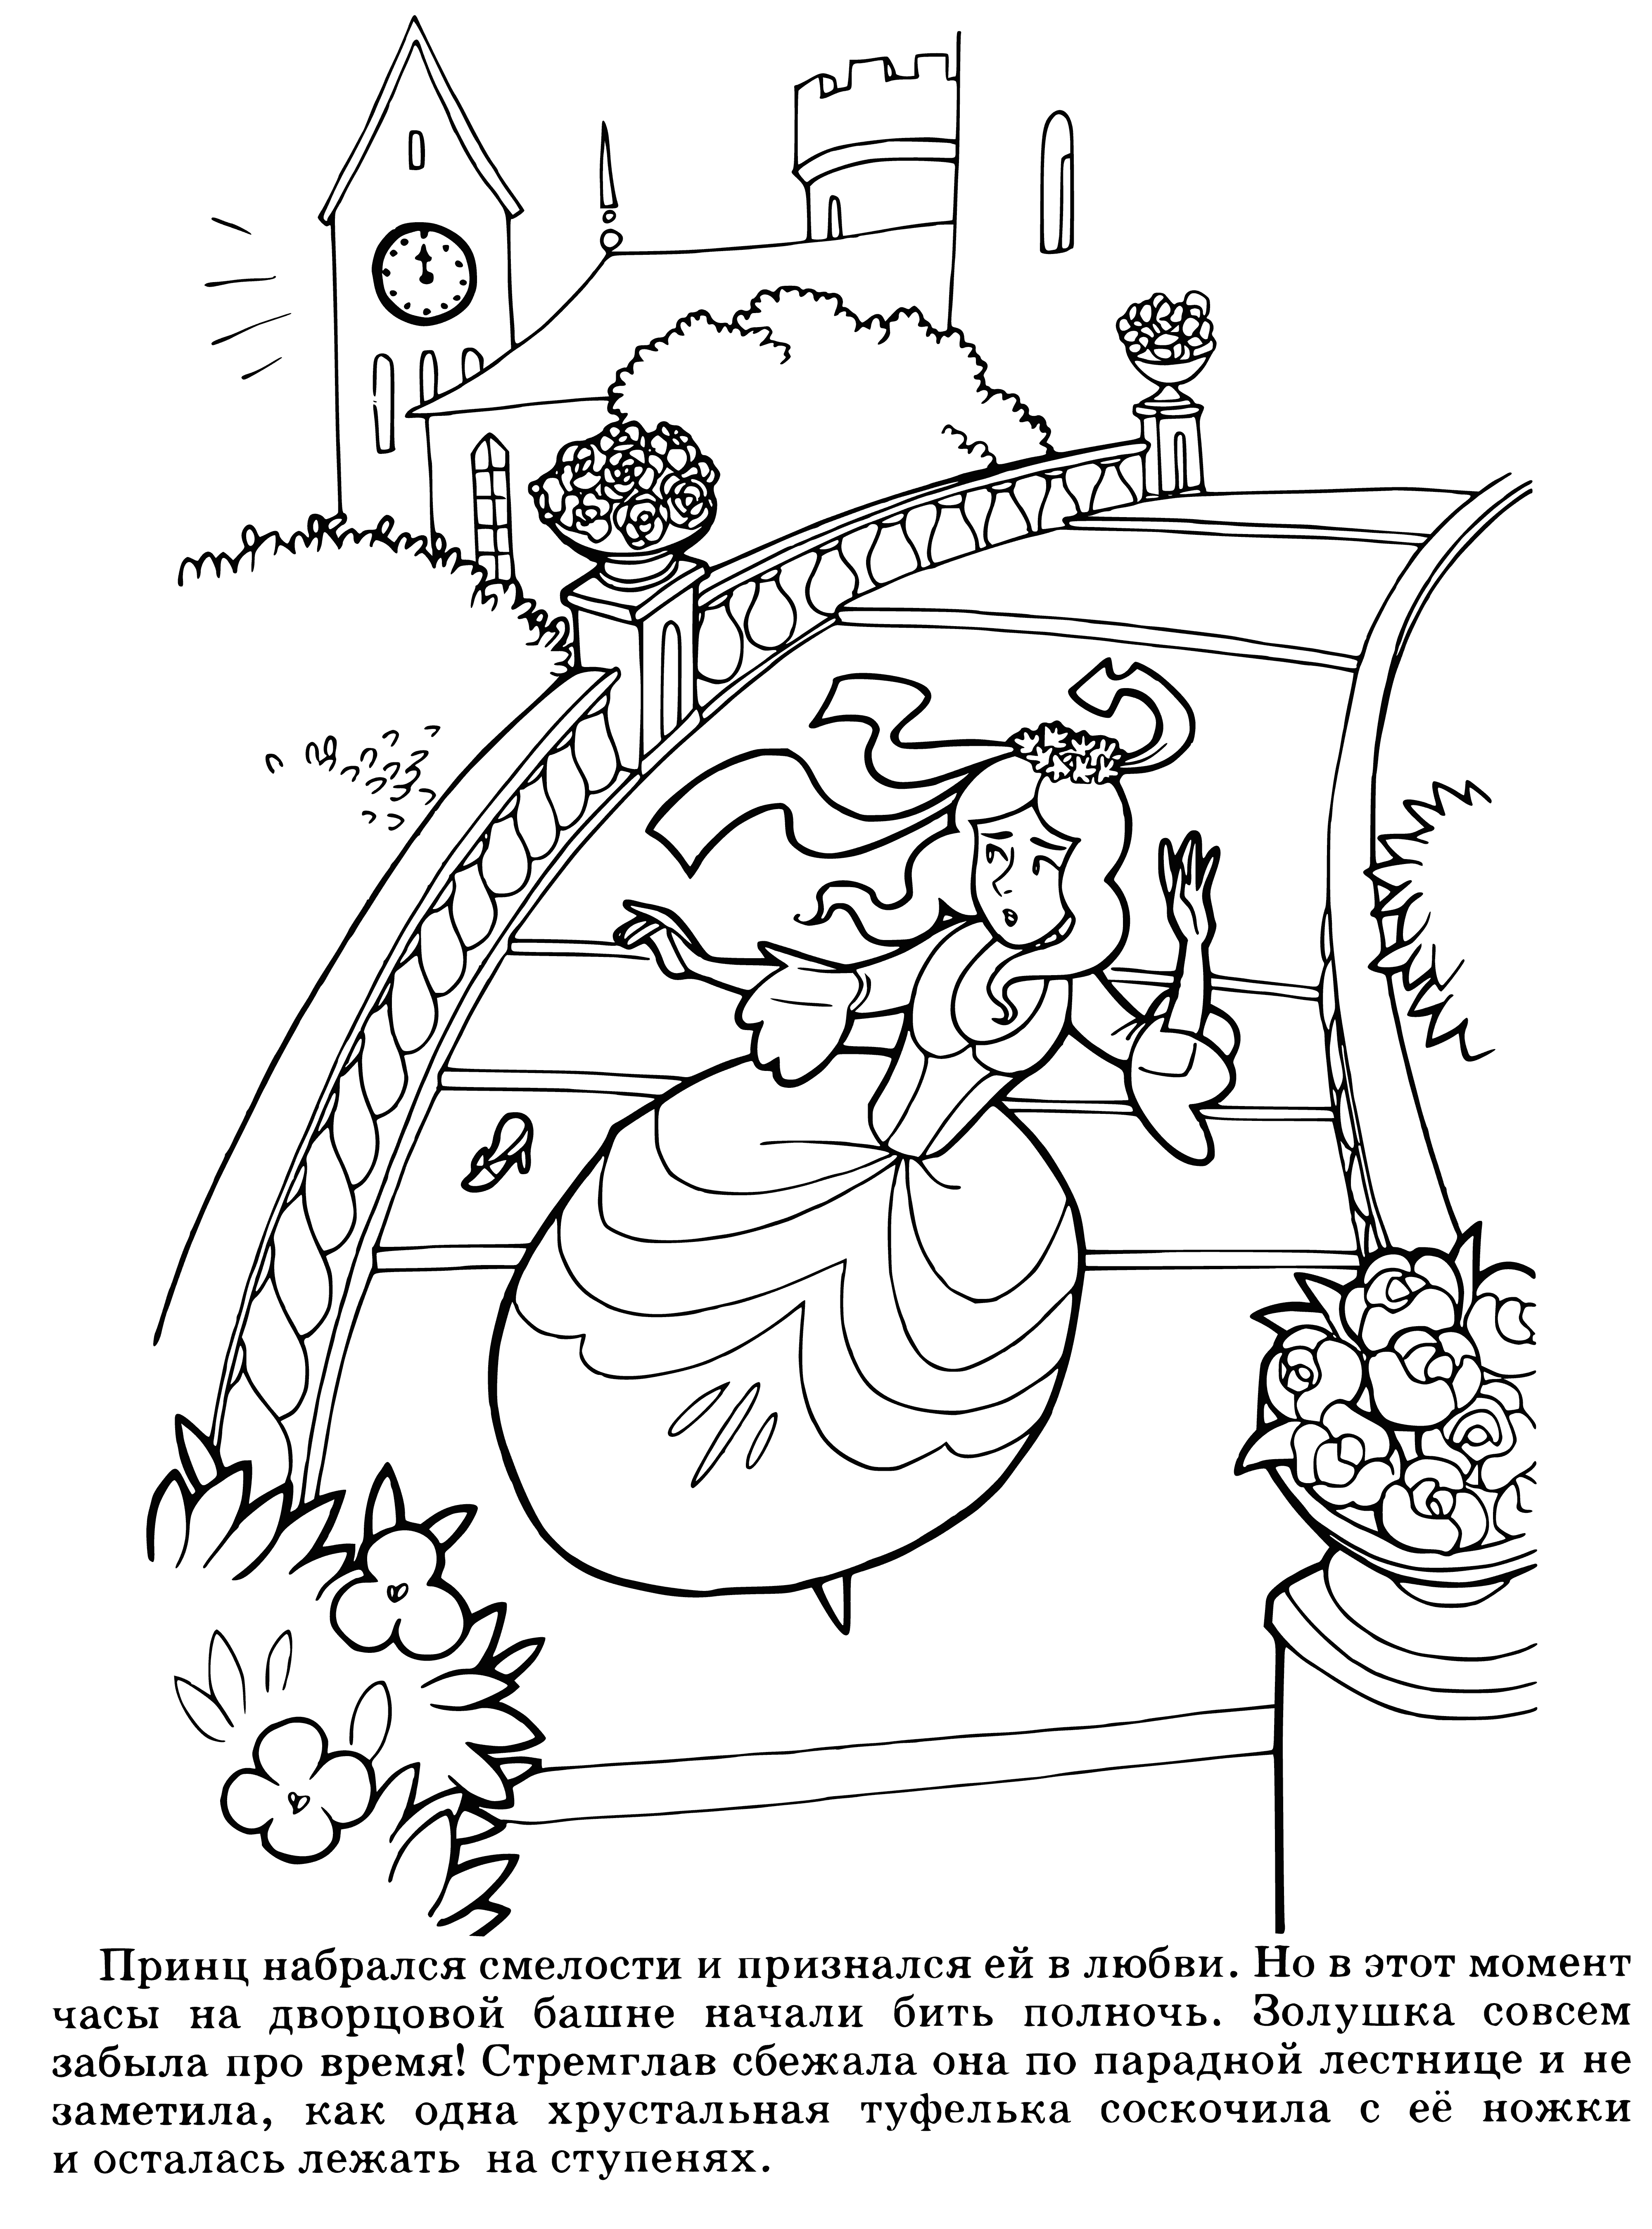 coloring page: A woman in a dark room holds a valuable glass slipper, sadly recalling something painful.